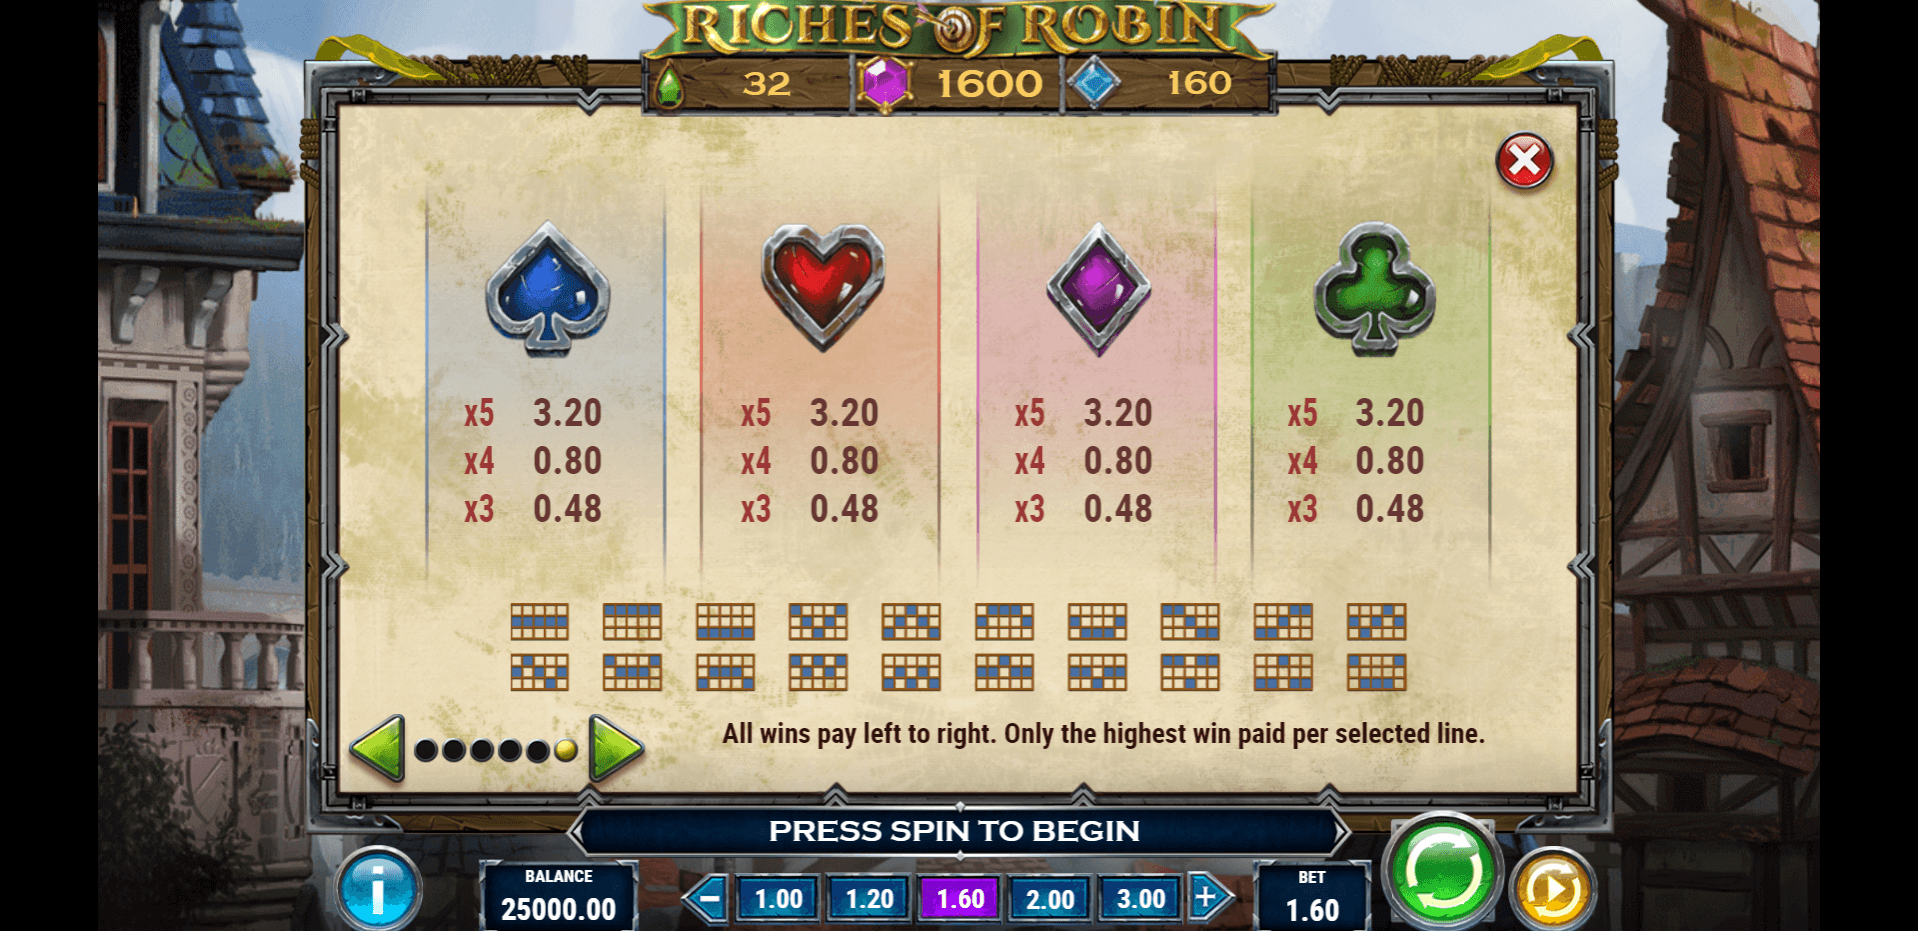 riches of robin slot machine detail image 5